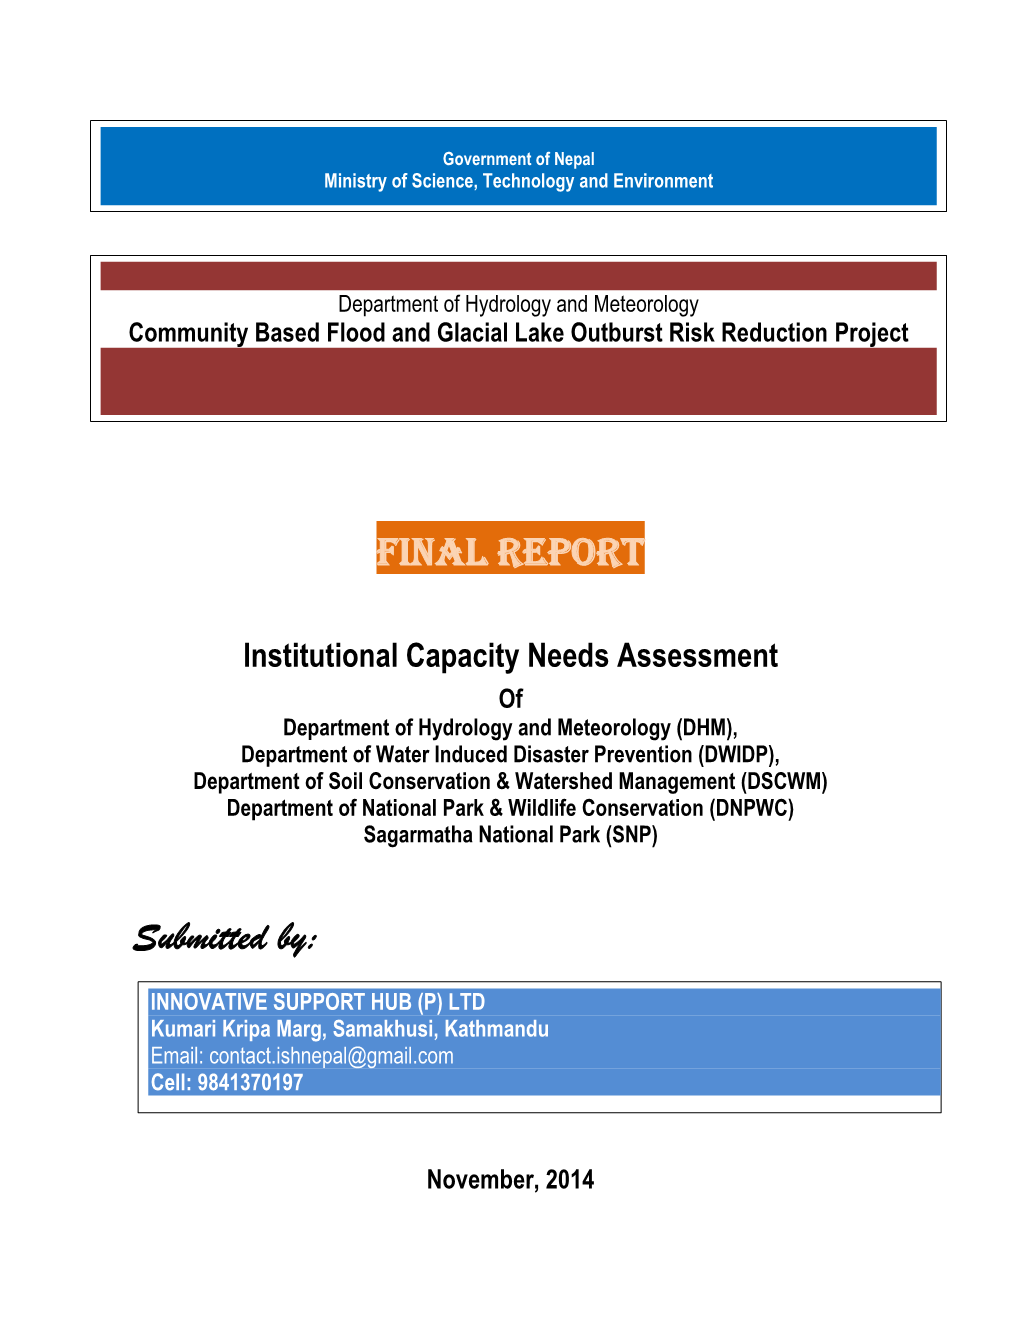 Final Report Submitted to Department Hydrology and Meteorology